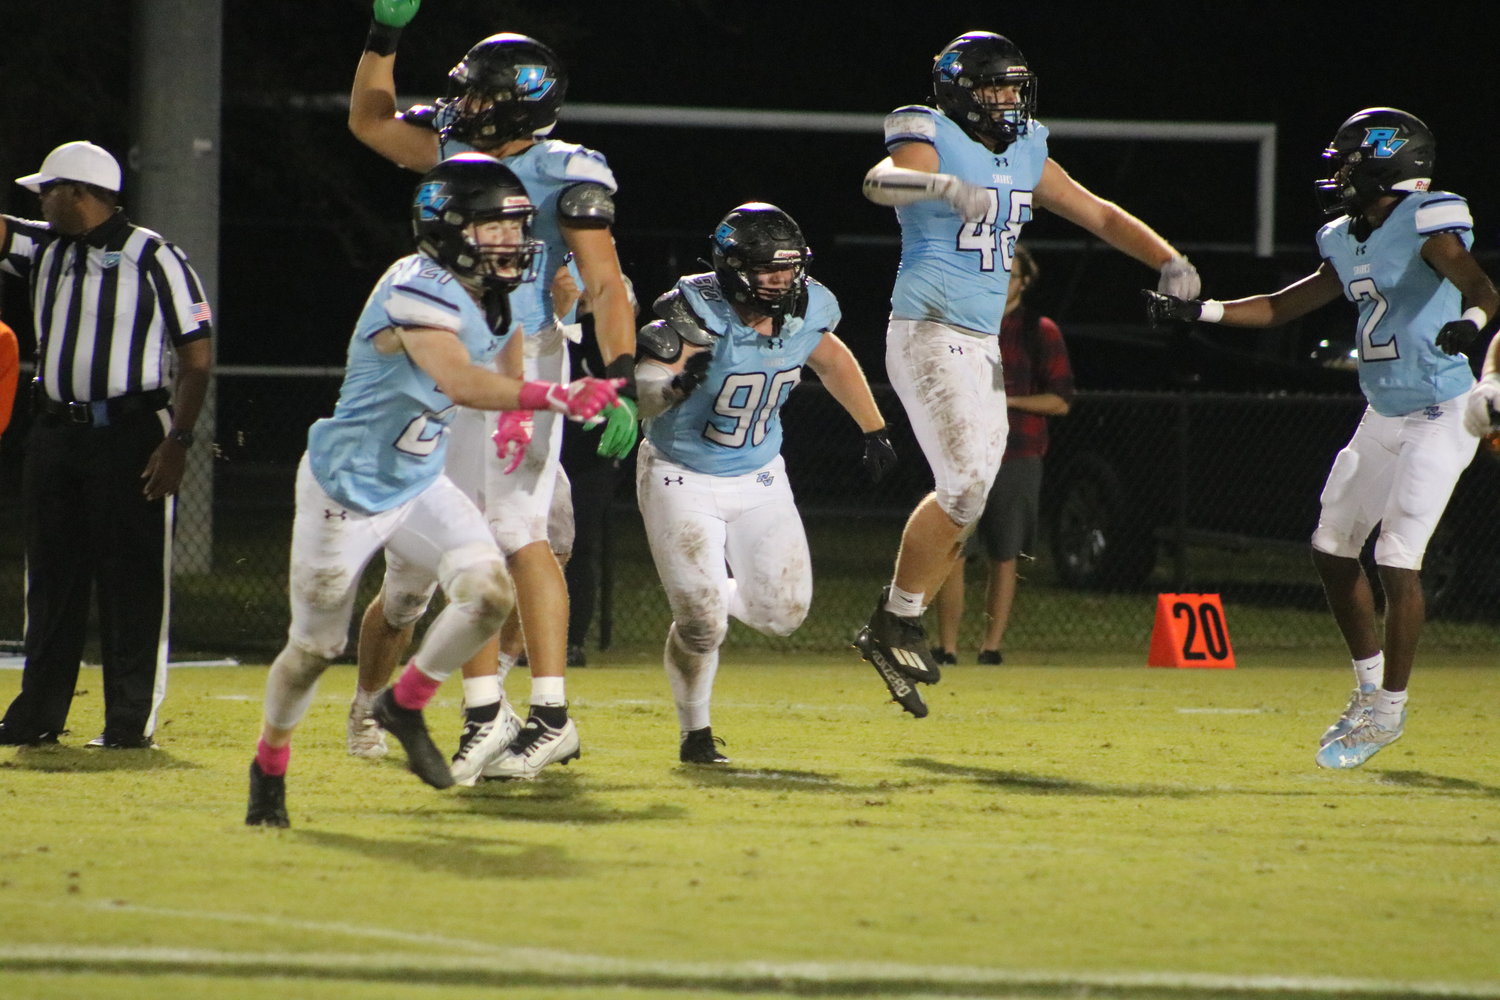 The Sharks’ defense celebrates after a measurement confirmed they had stopped the Bulldogs short on a fourth down attempt in the first half.